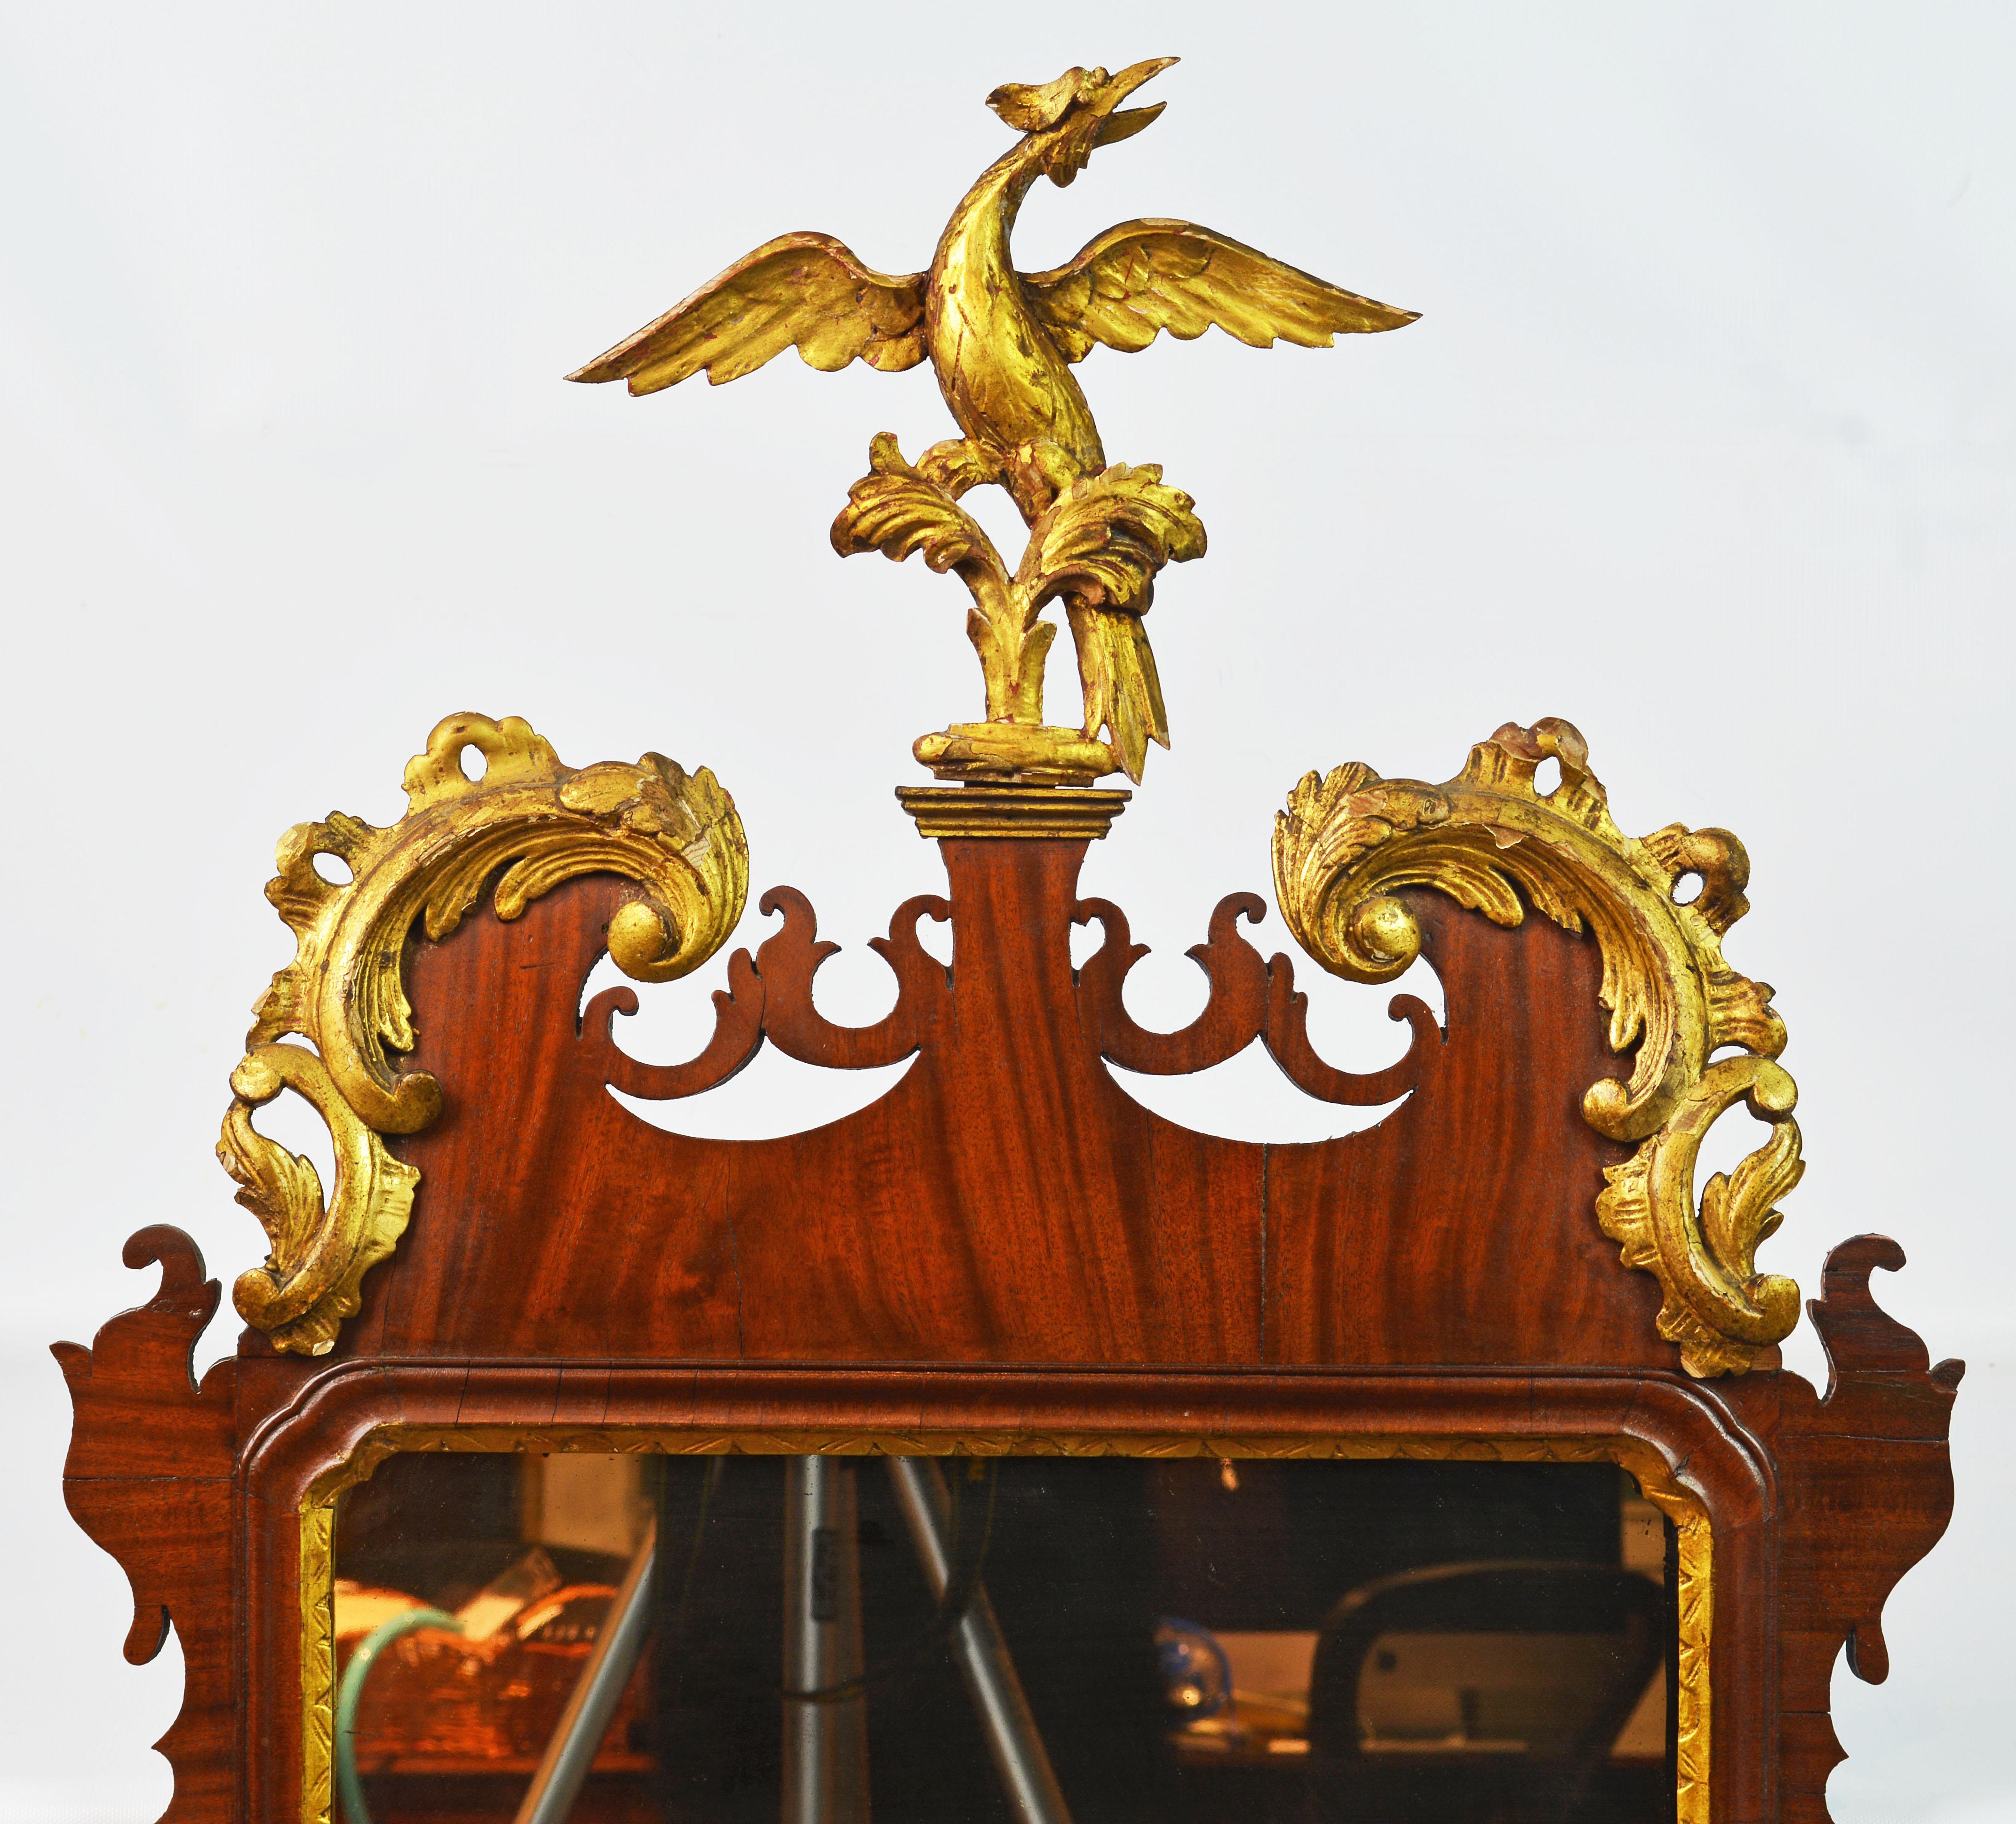 This fine mahogany Chippendale mirror dating to the late 18th century features a pediment with elaborate gilt foliate scrolls centering a carved gilt phoenix bird above sides with carved gilt leaf garlands and a shaped bottom part. We have judged